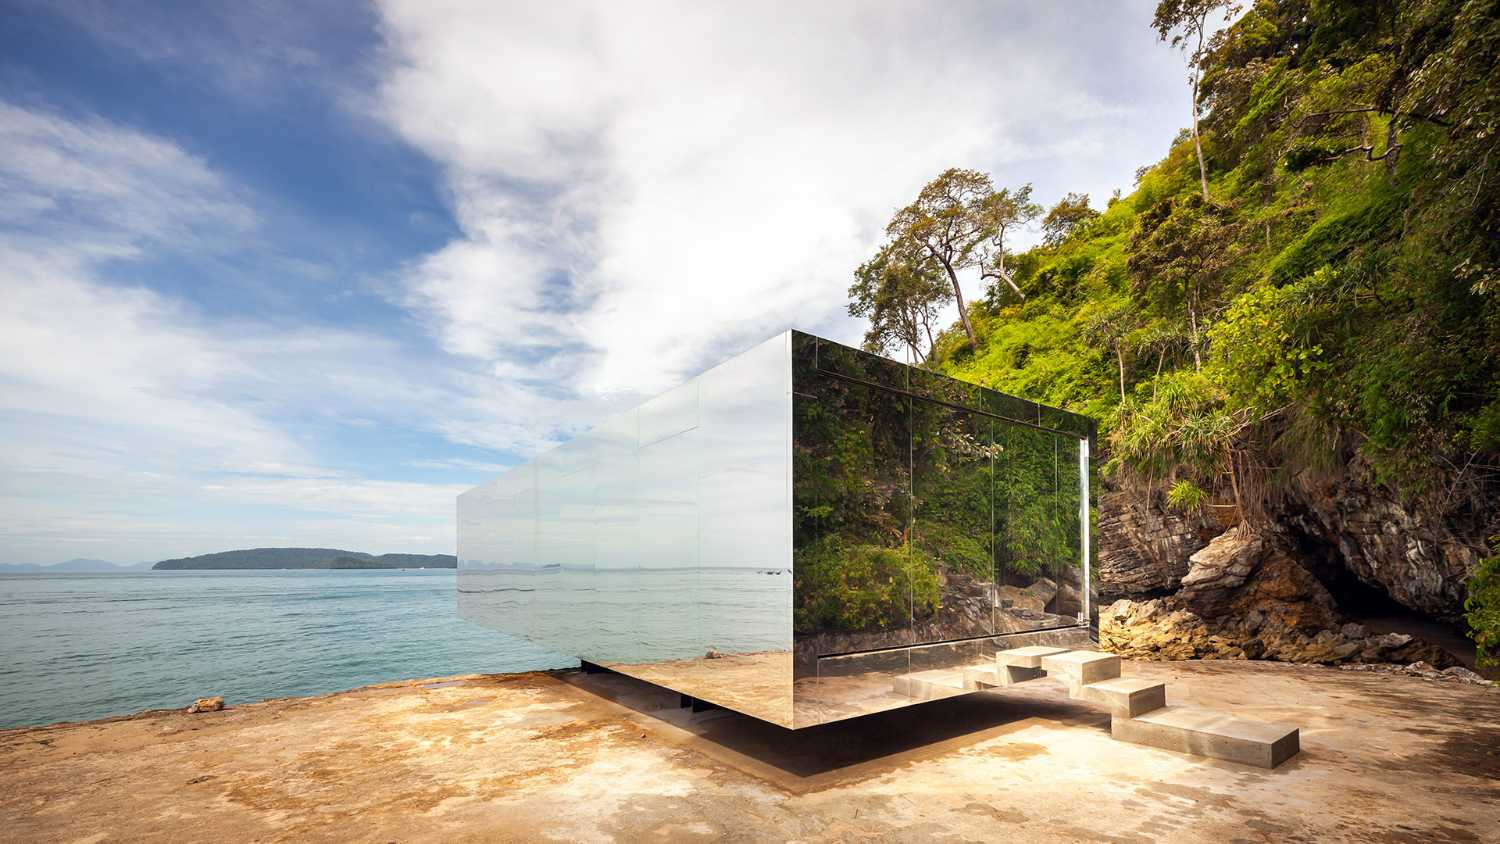 No sunrise, no sunset pavilion. The steel reflects the surrounding nature between reality and illusion